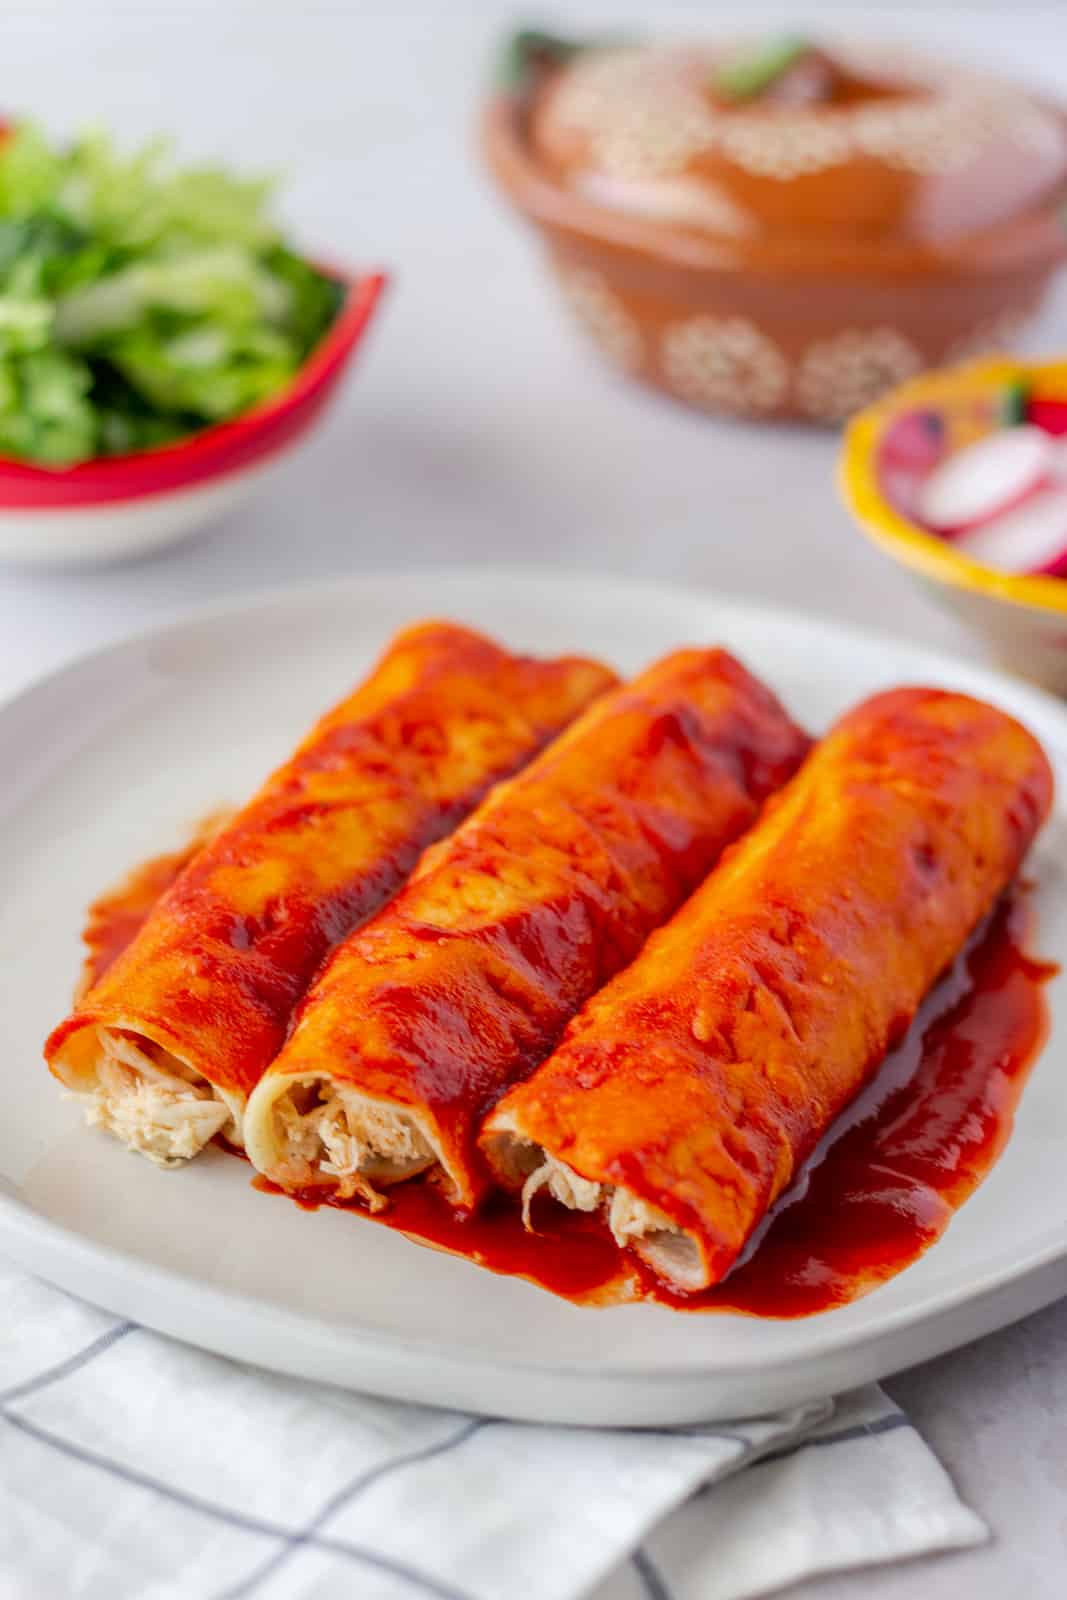 Enchiladas rojas on a plate with no toppings.